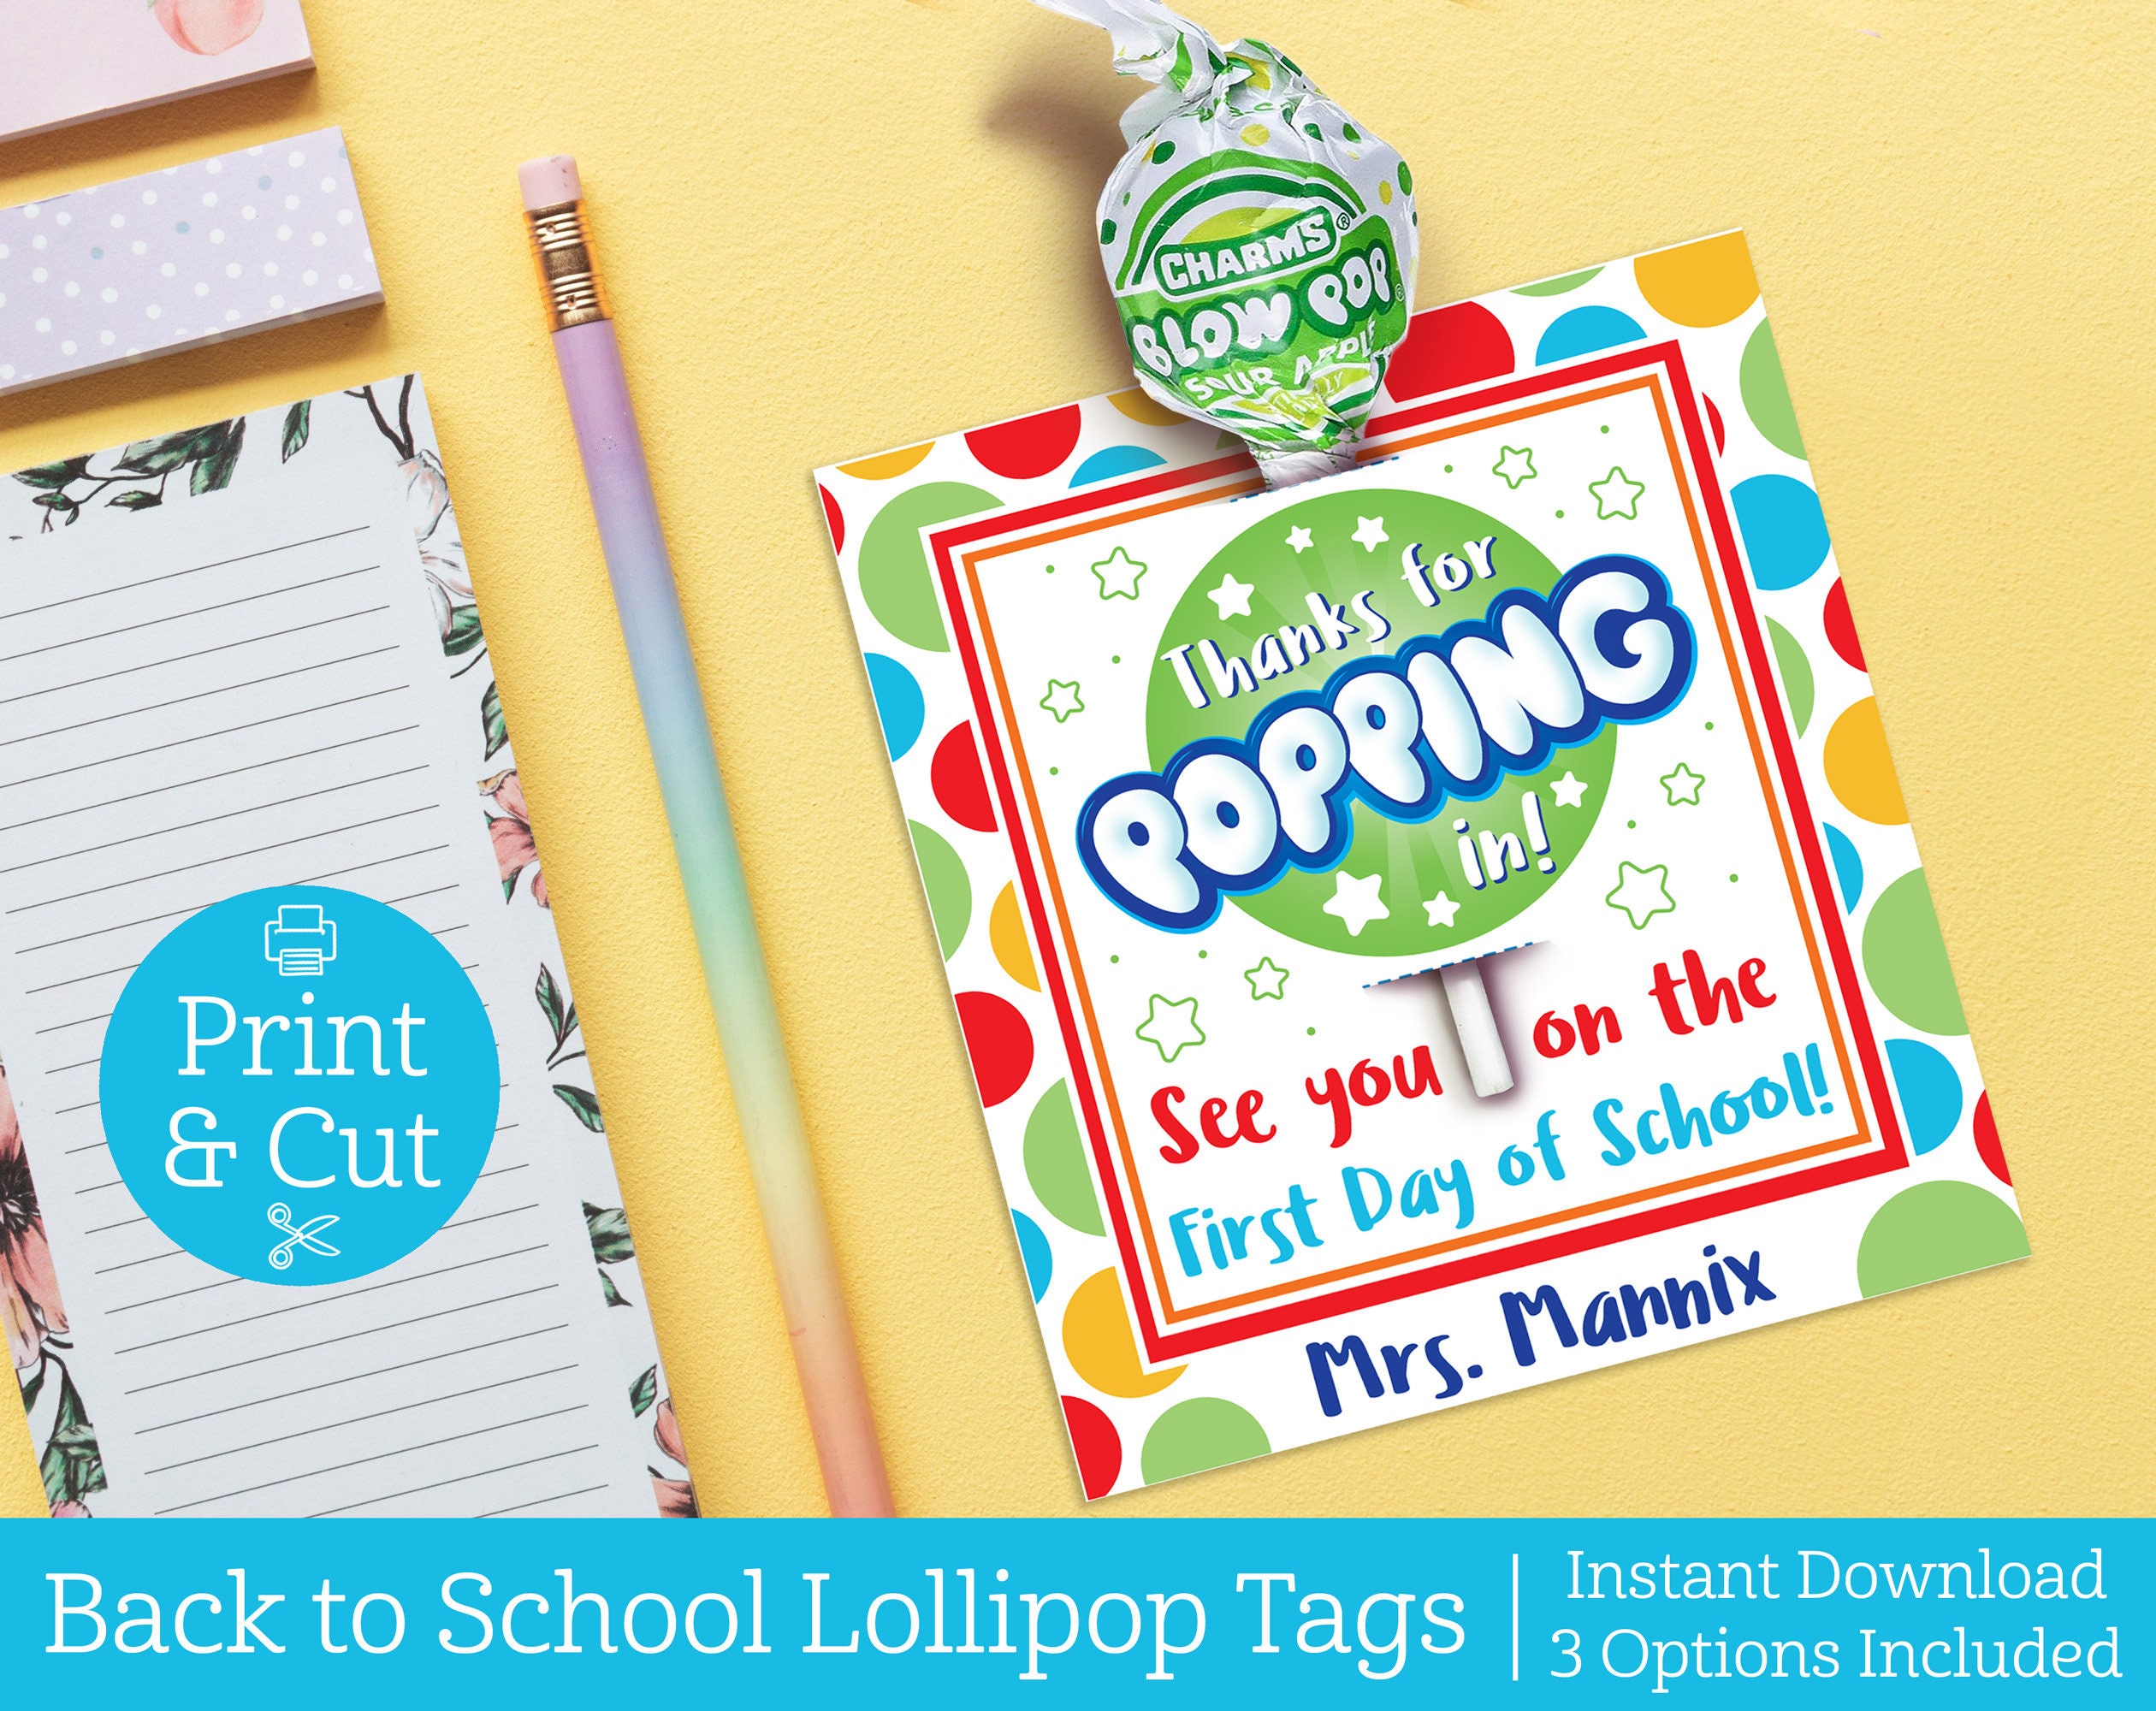 Thanks For Popping In Lollipop Free Printable Printable Templates